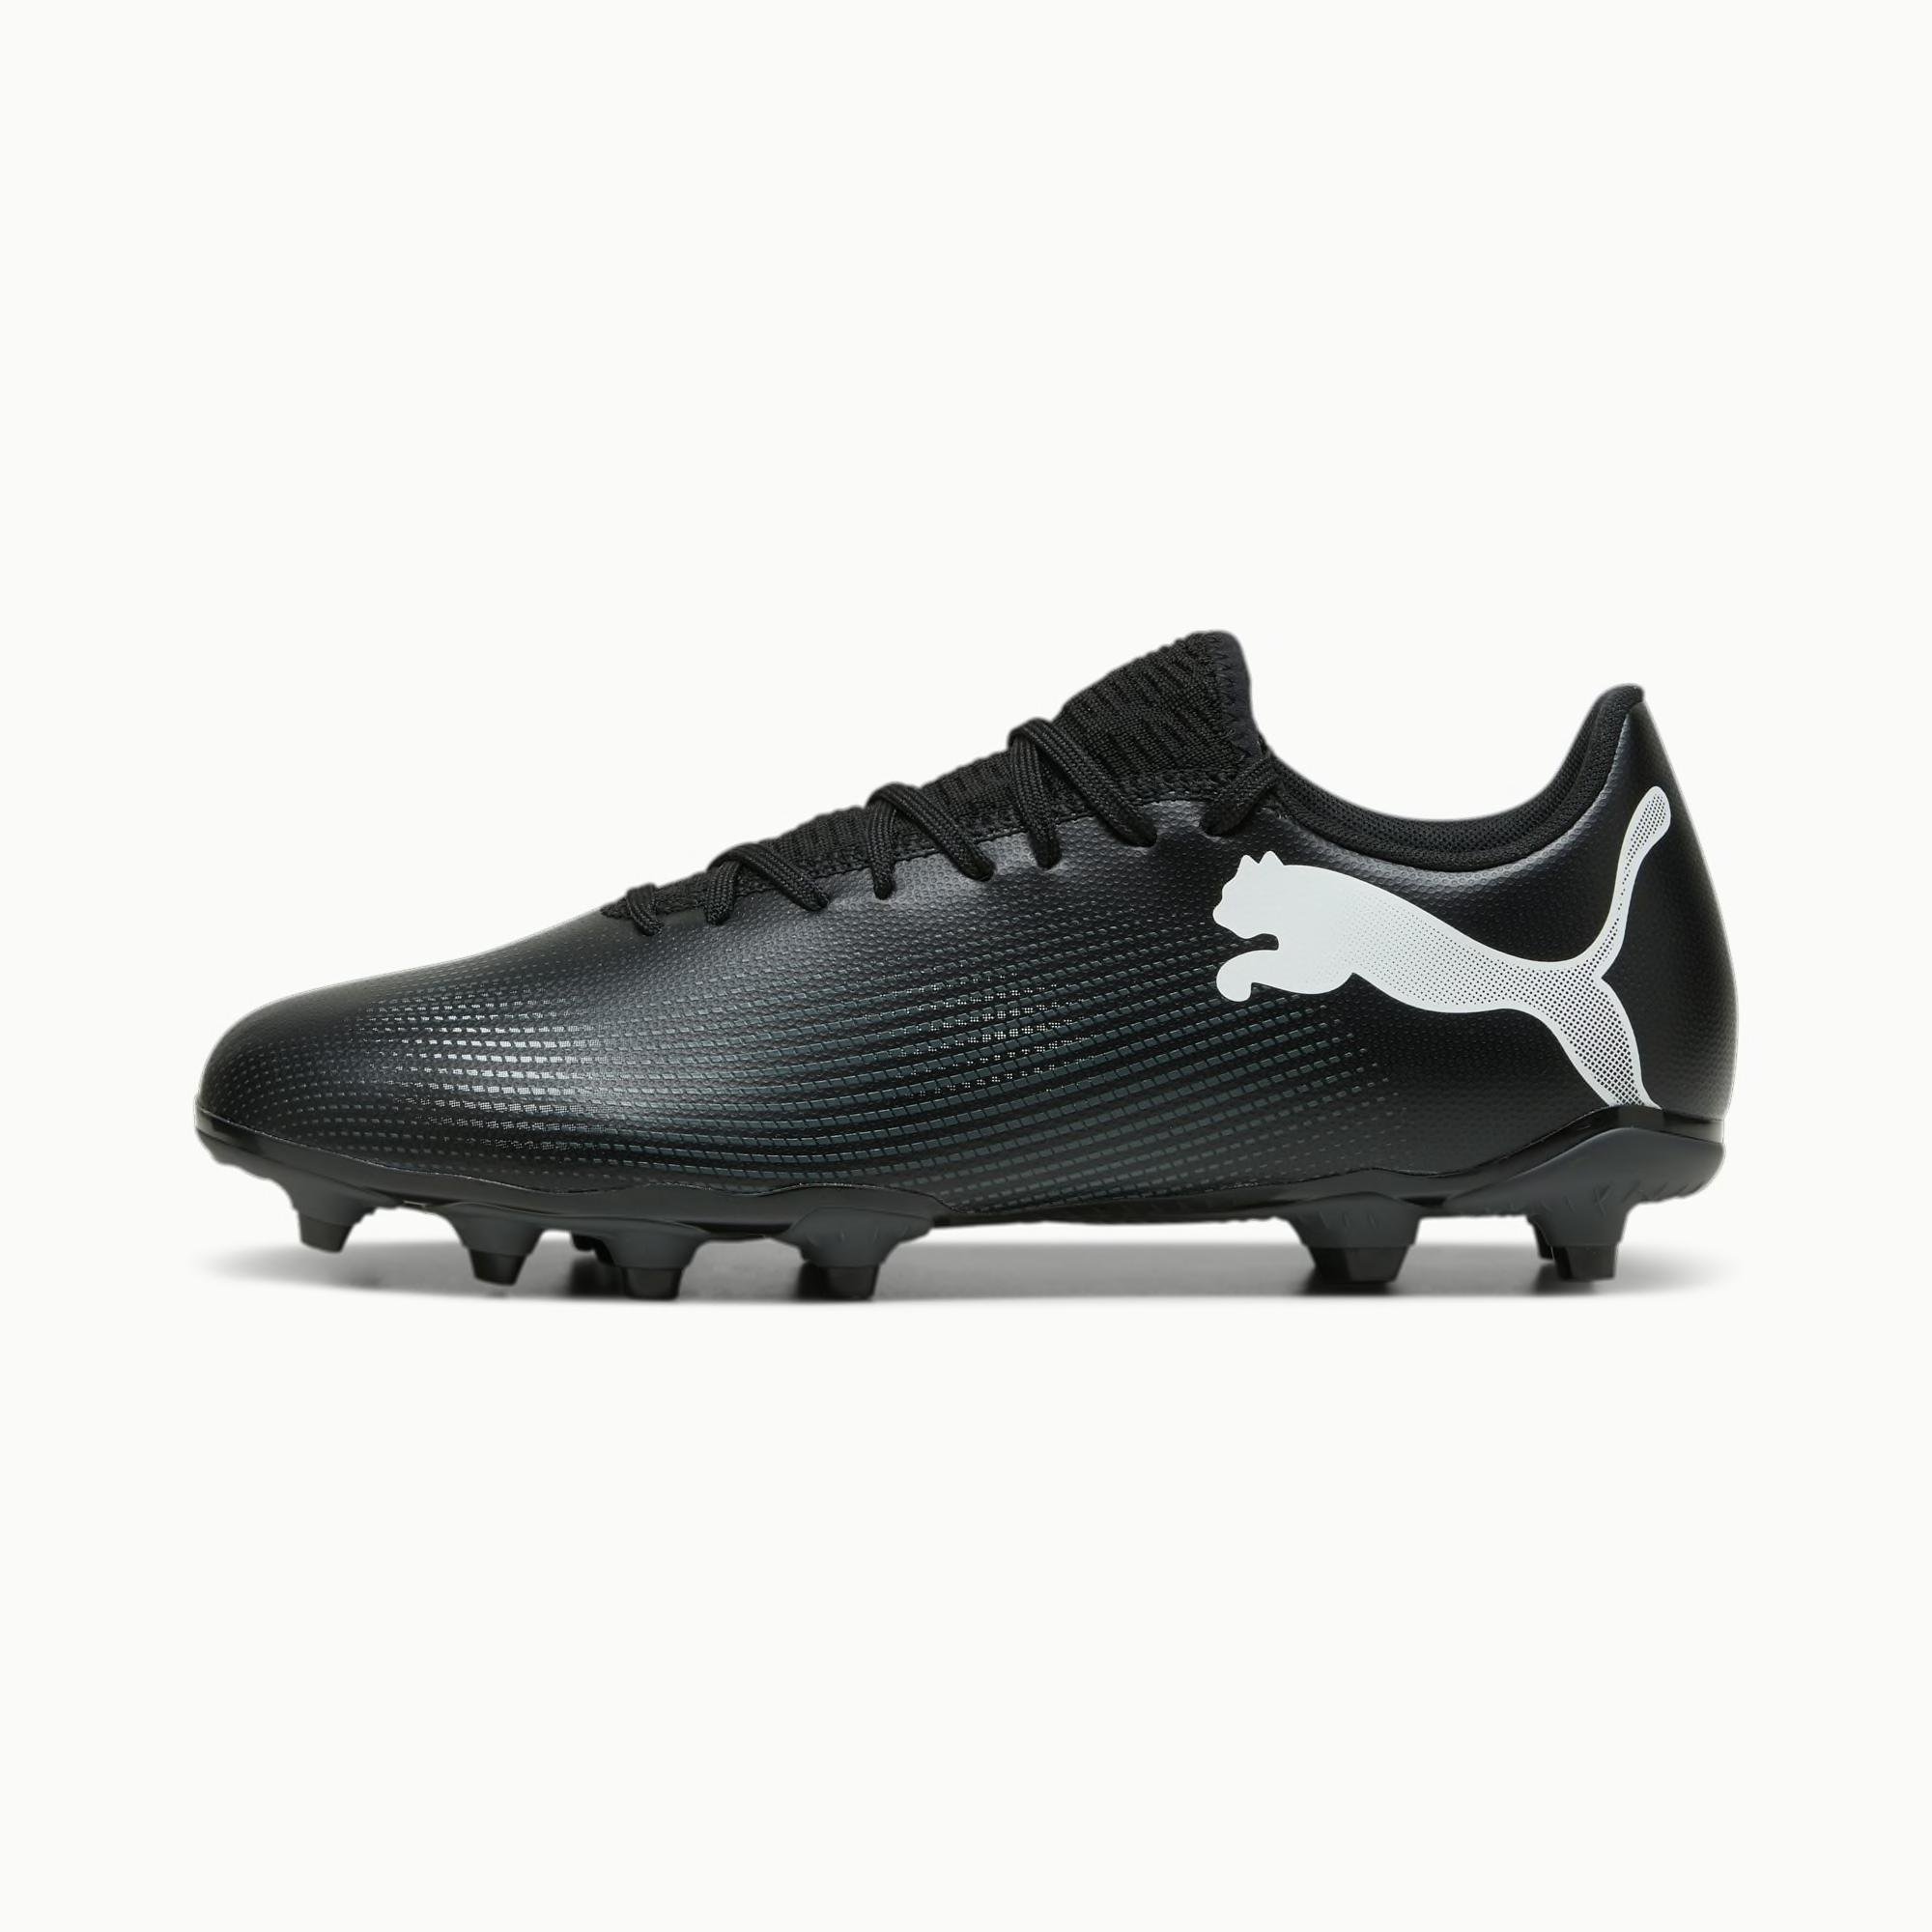 FUTURE 7 PLAY FG/AG Men's Soccer Cleats by PUMA